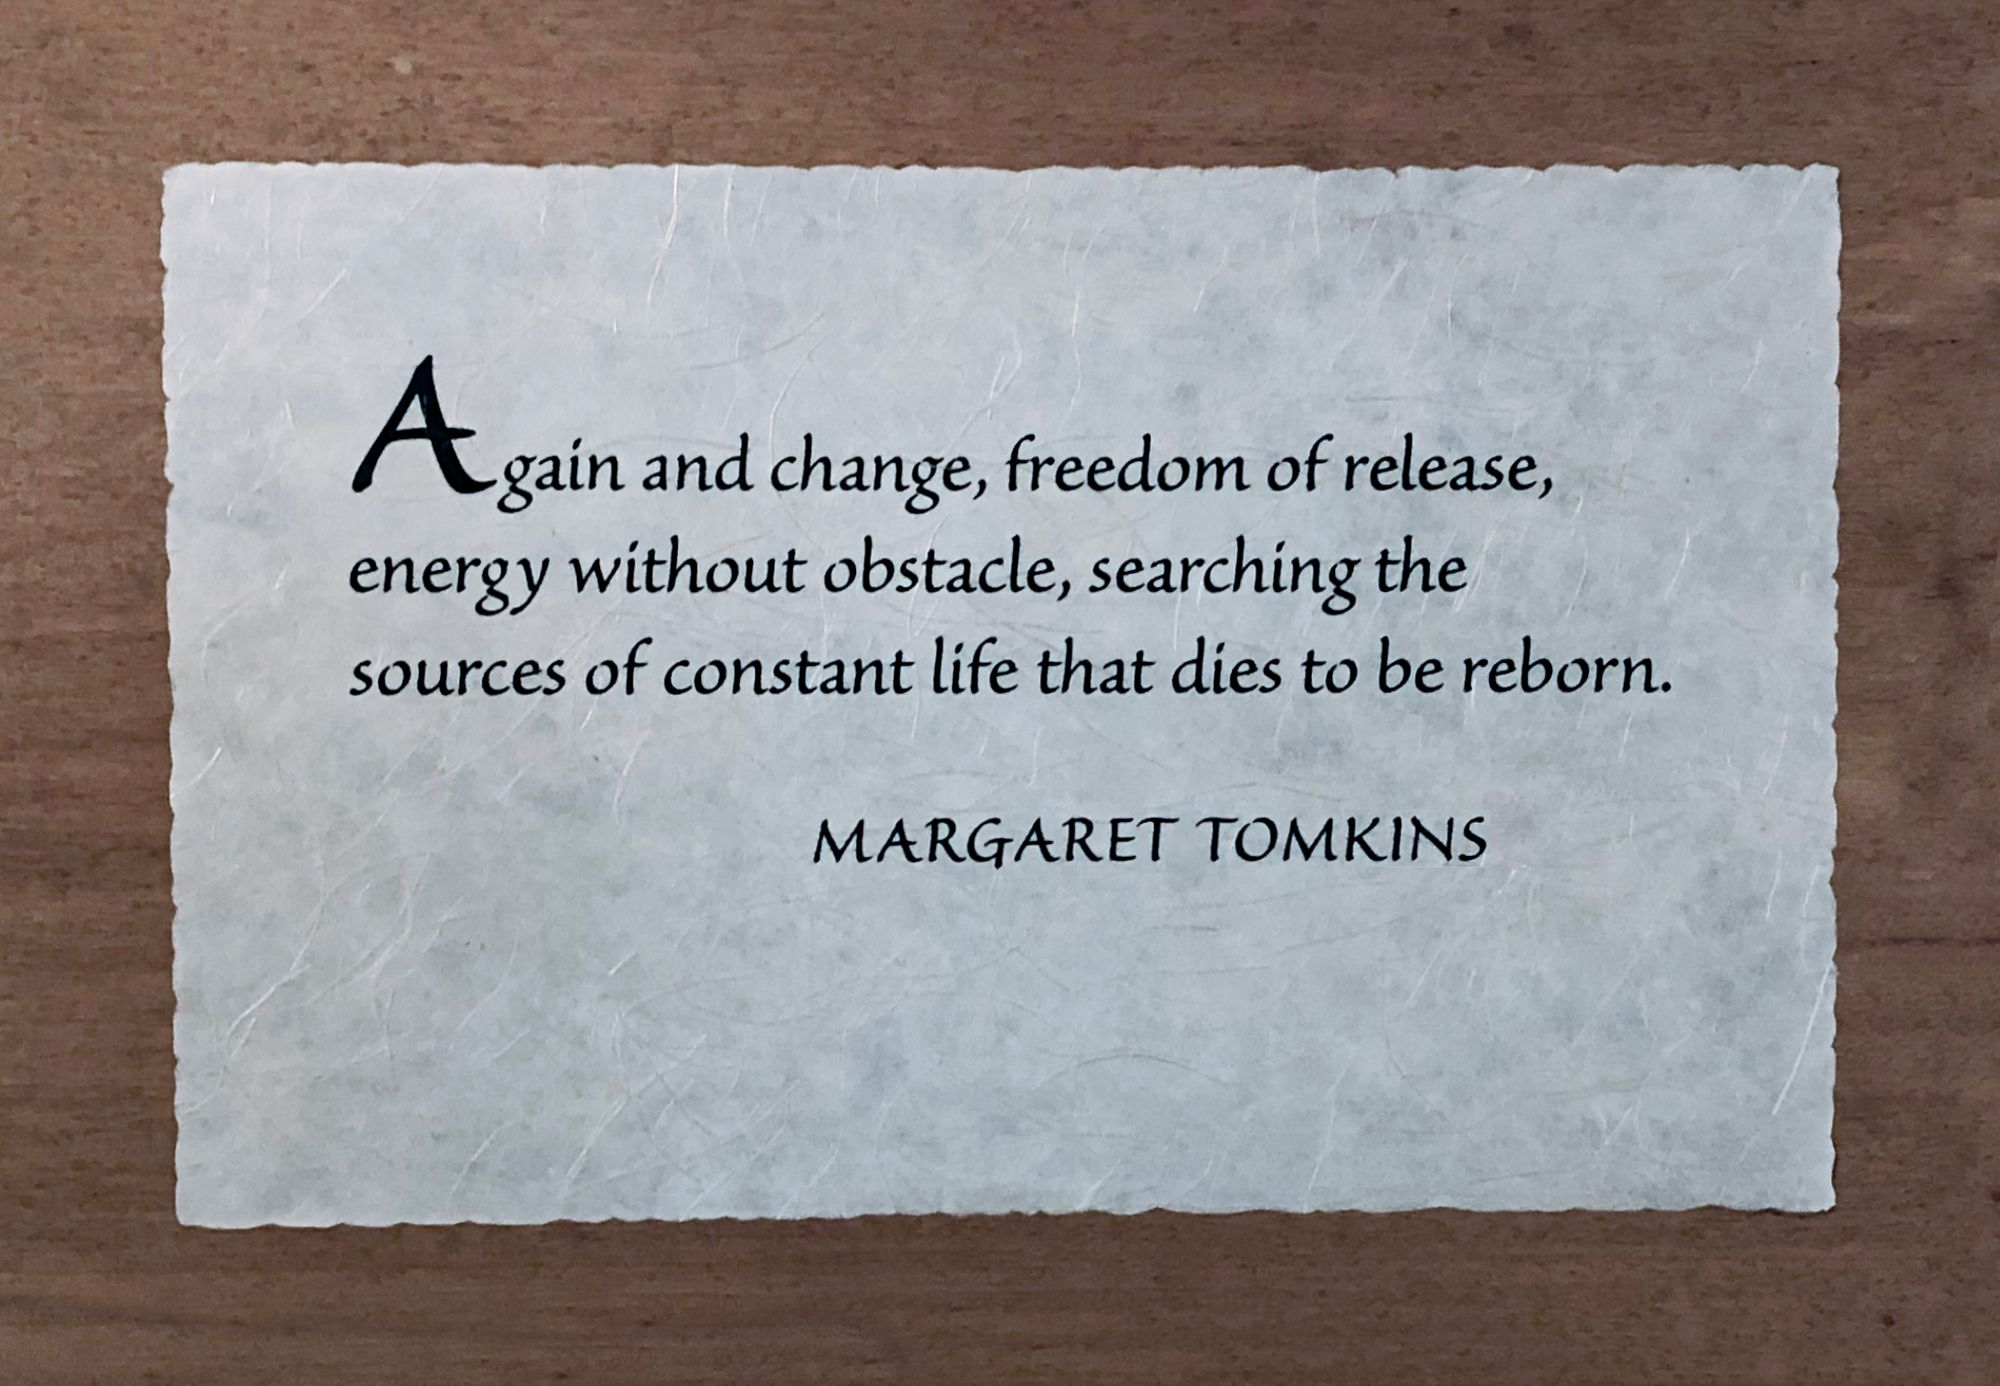 Photo of wooden plaque with Margaret Tomkins quote: “Again and change, freedom of release, energy without obstacle, searching the sources of constant life that dies to be reborn.” 